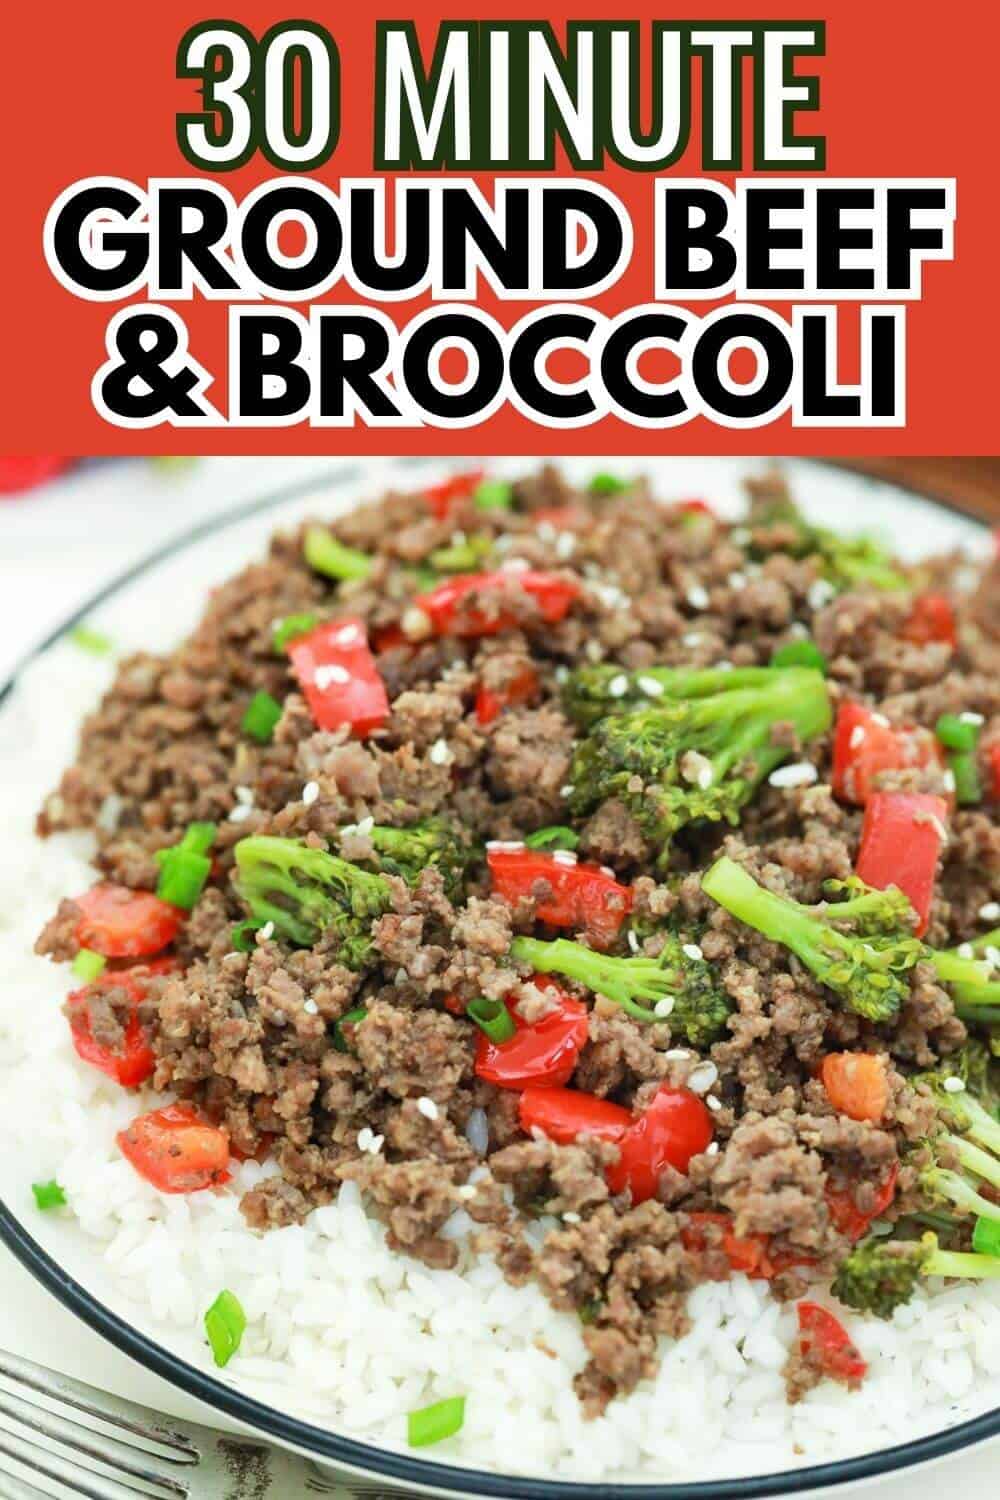 Recipe photo with text reading 30 minute ground beef & broccoli.